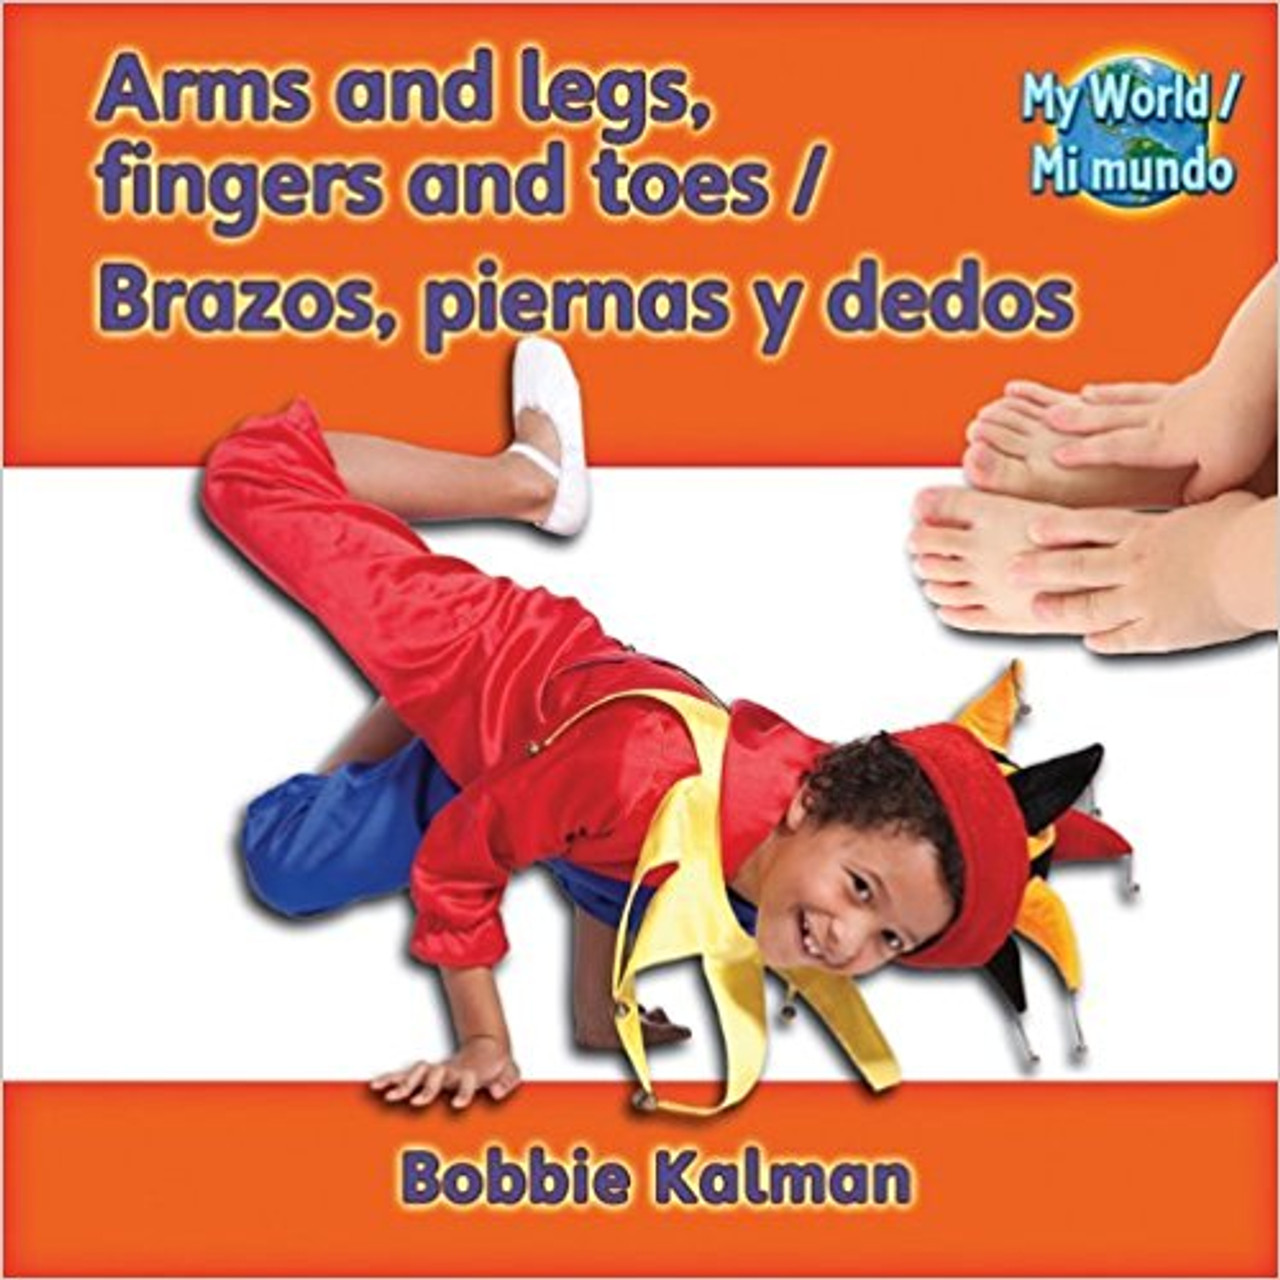 Arms and Legs, Fingers and Toes/Brazos, Piernas y Dedos by Bobbie Kalman